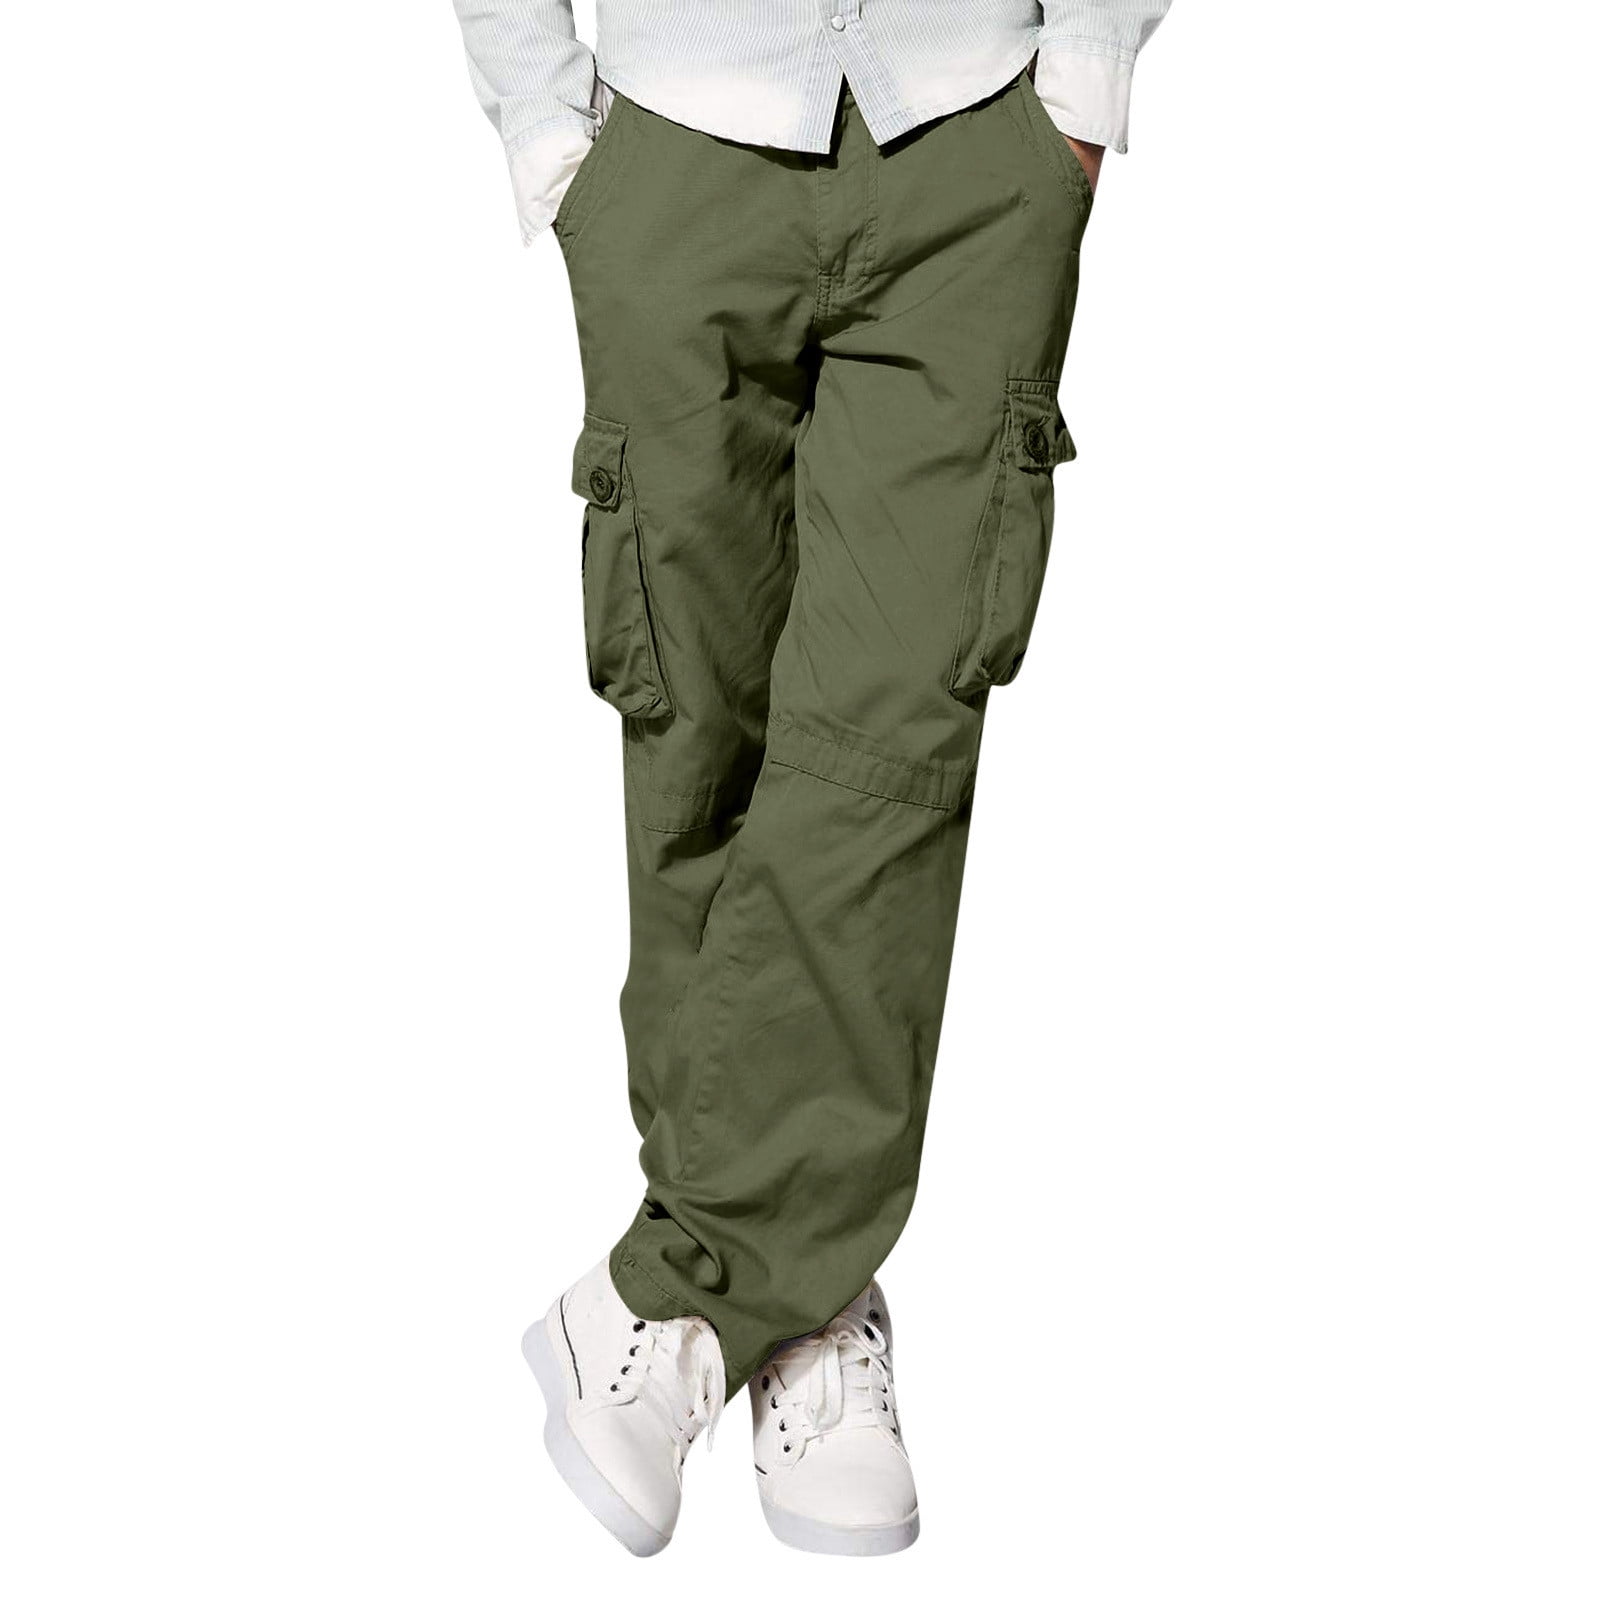 Jacenvly Cargo Pants for Men Clearance Long Cargo Pants Elastic Waisted  Pocket Plain Mens Dress Pants Cargo Pants Slim Multi Straight Trousers  Outdoor Sports Overalls Pants 